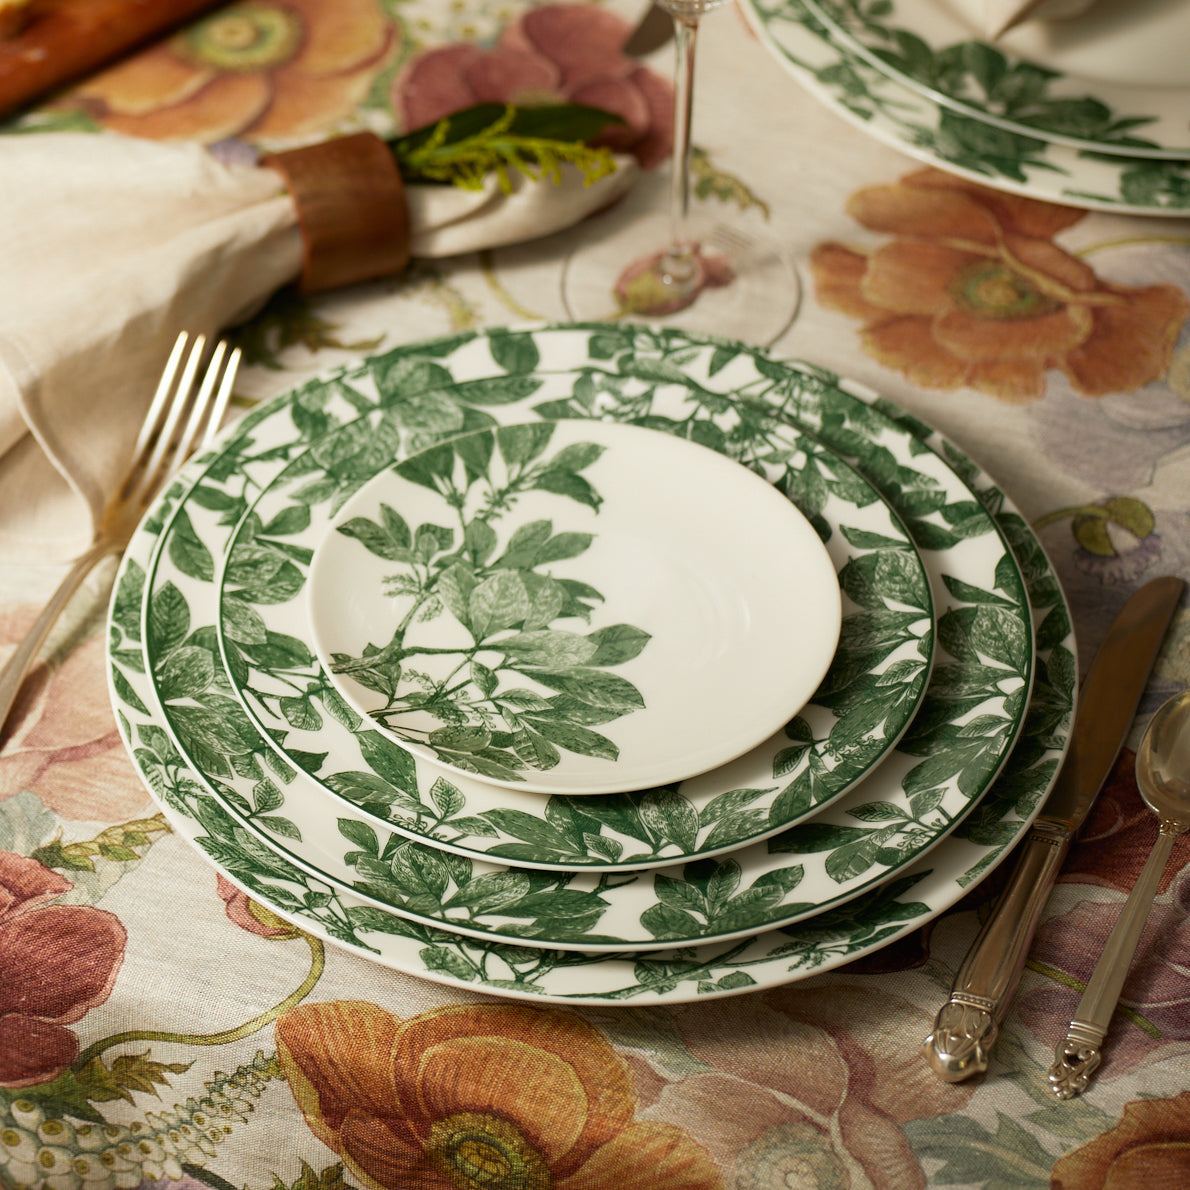 A vintage collection of Caskata Arbor Green Salad Plates and silverware on a floral tablecloth.